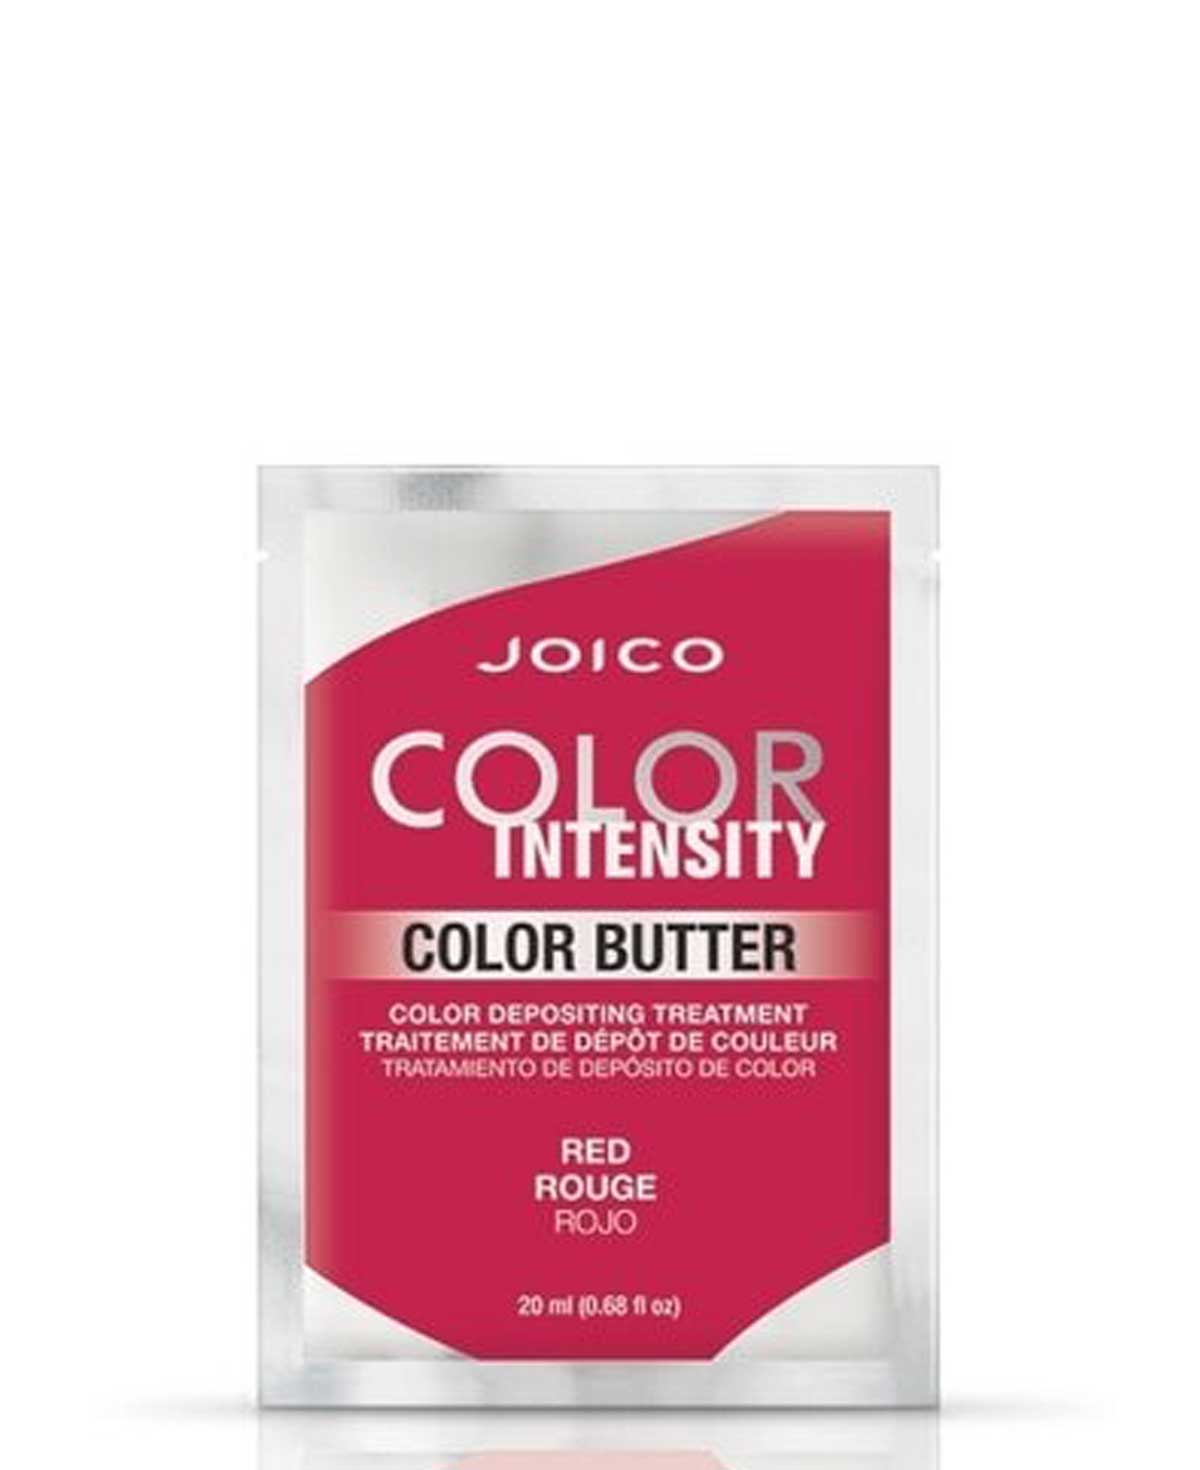 Joico Intensity Color Butter - Foil Red 20ml